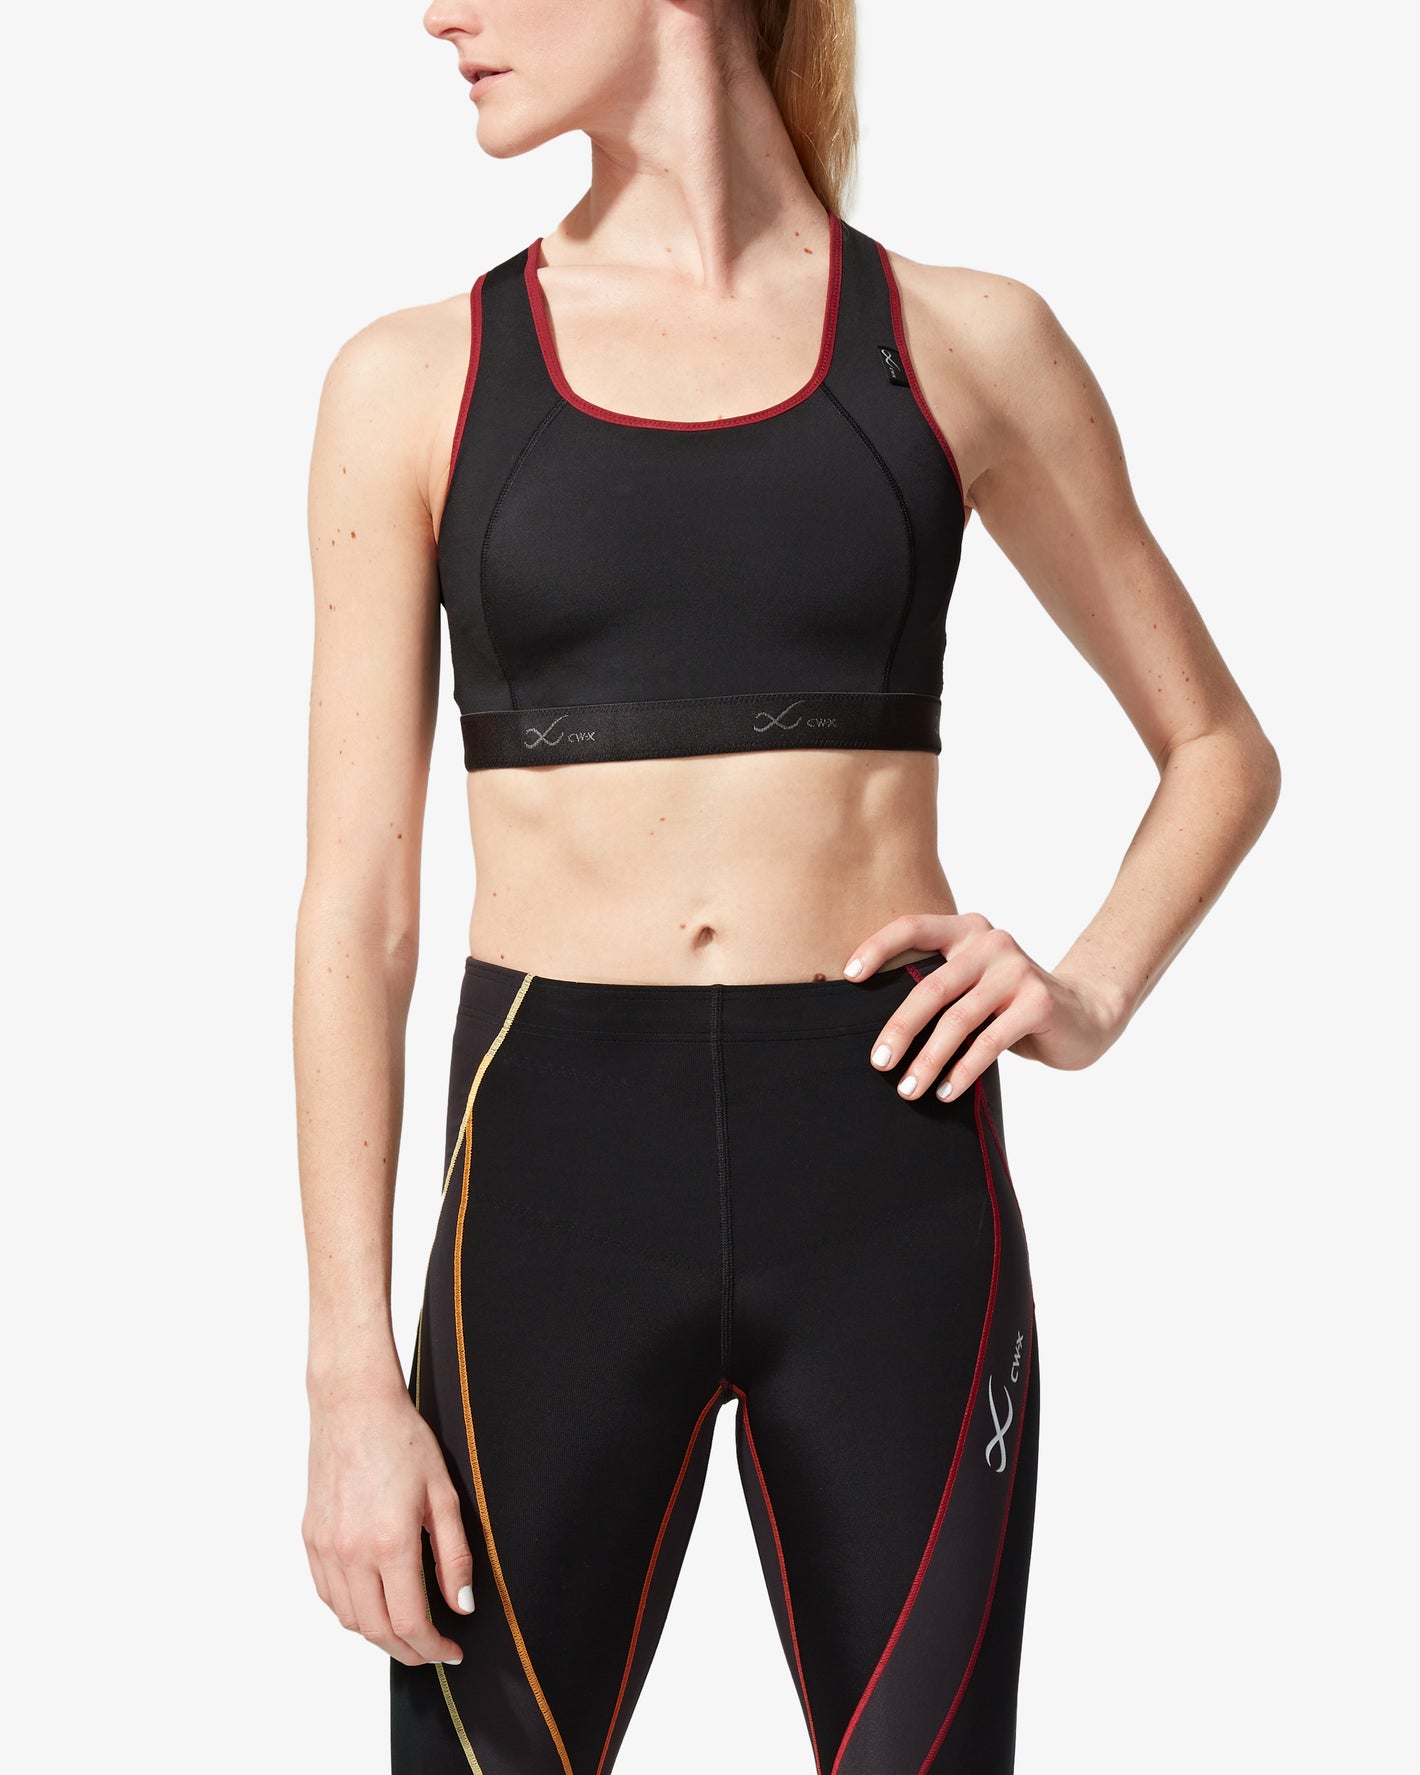 Women's Xtra Support High Impact Sports Bra in Black/Rooibos